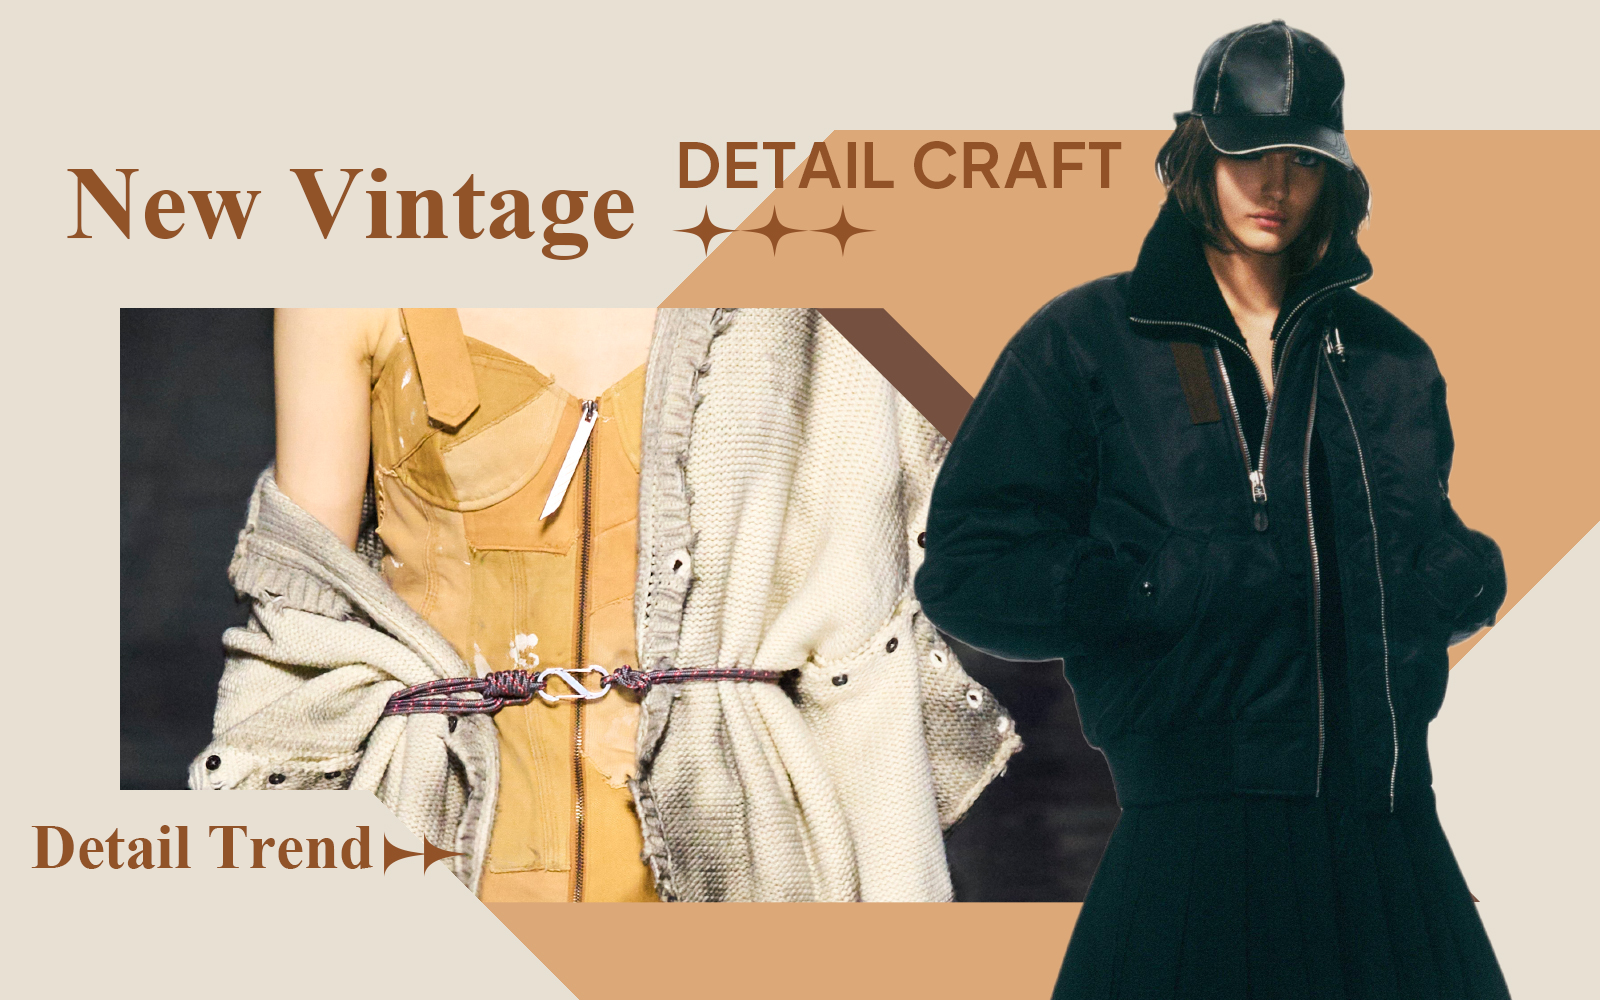 New Vintage -- The Detail & Craft Trend for Womenswear